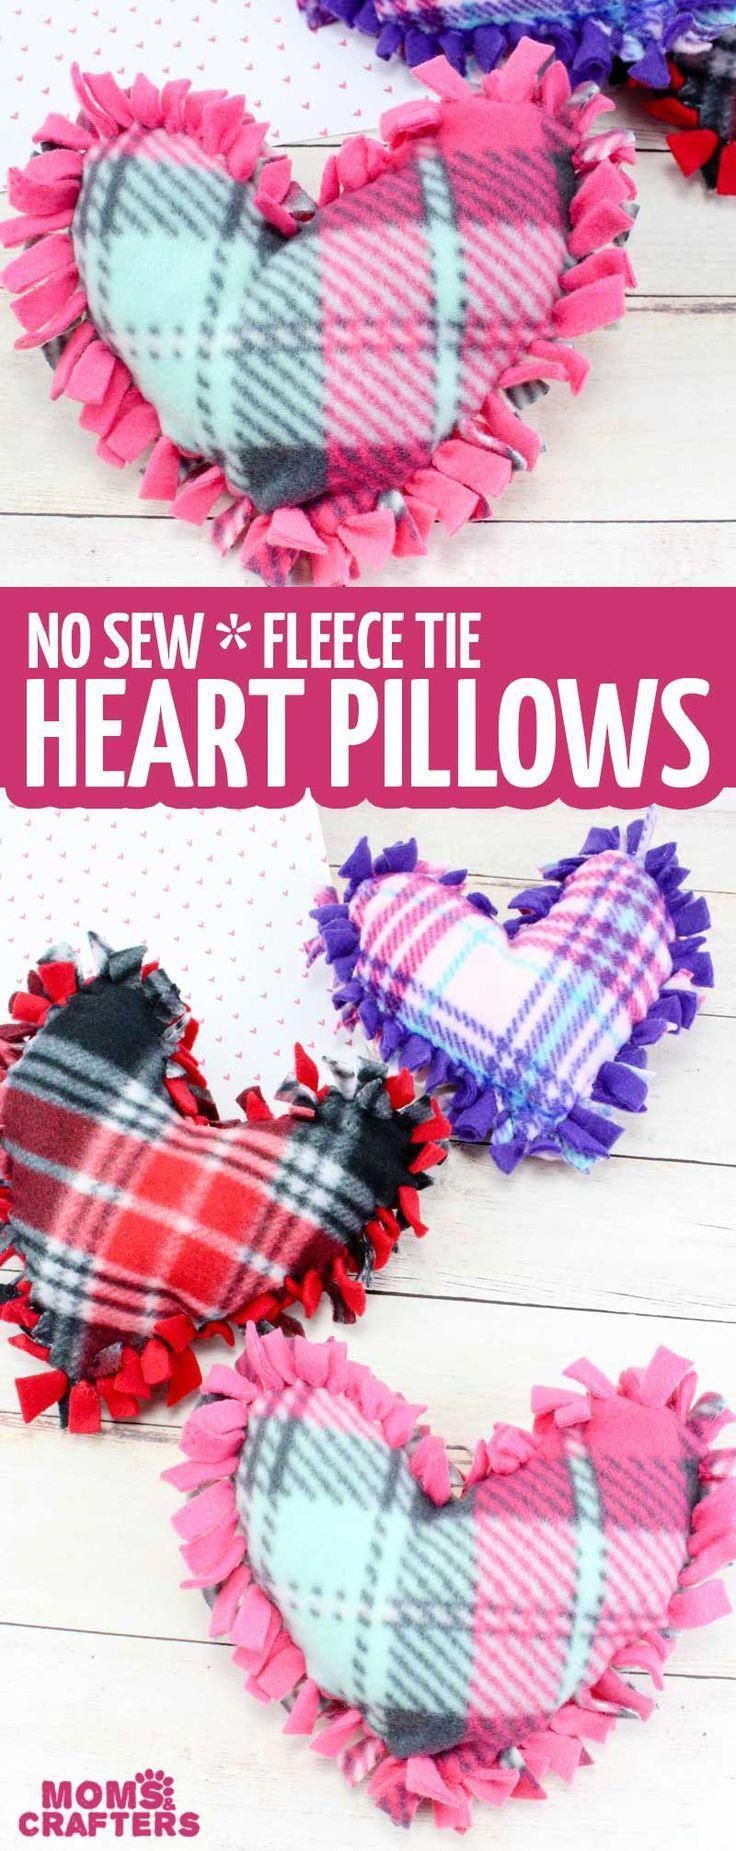 Valentine Pillows - No Sew Fleece Tie Heart Pillows -   18 fabric crafts For Kids to make ideas